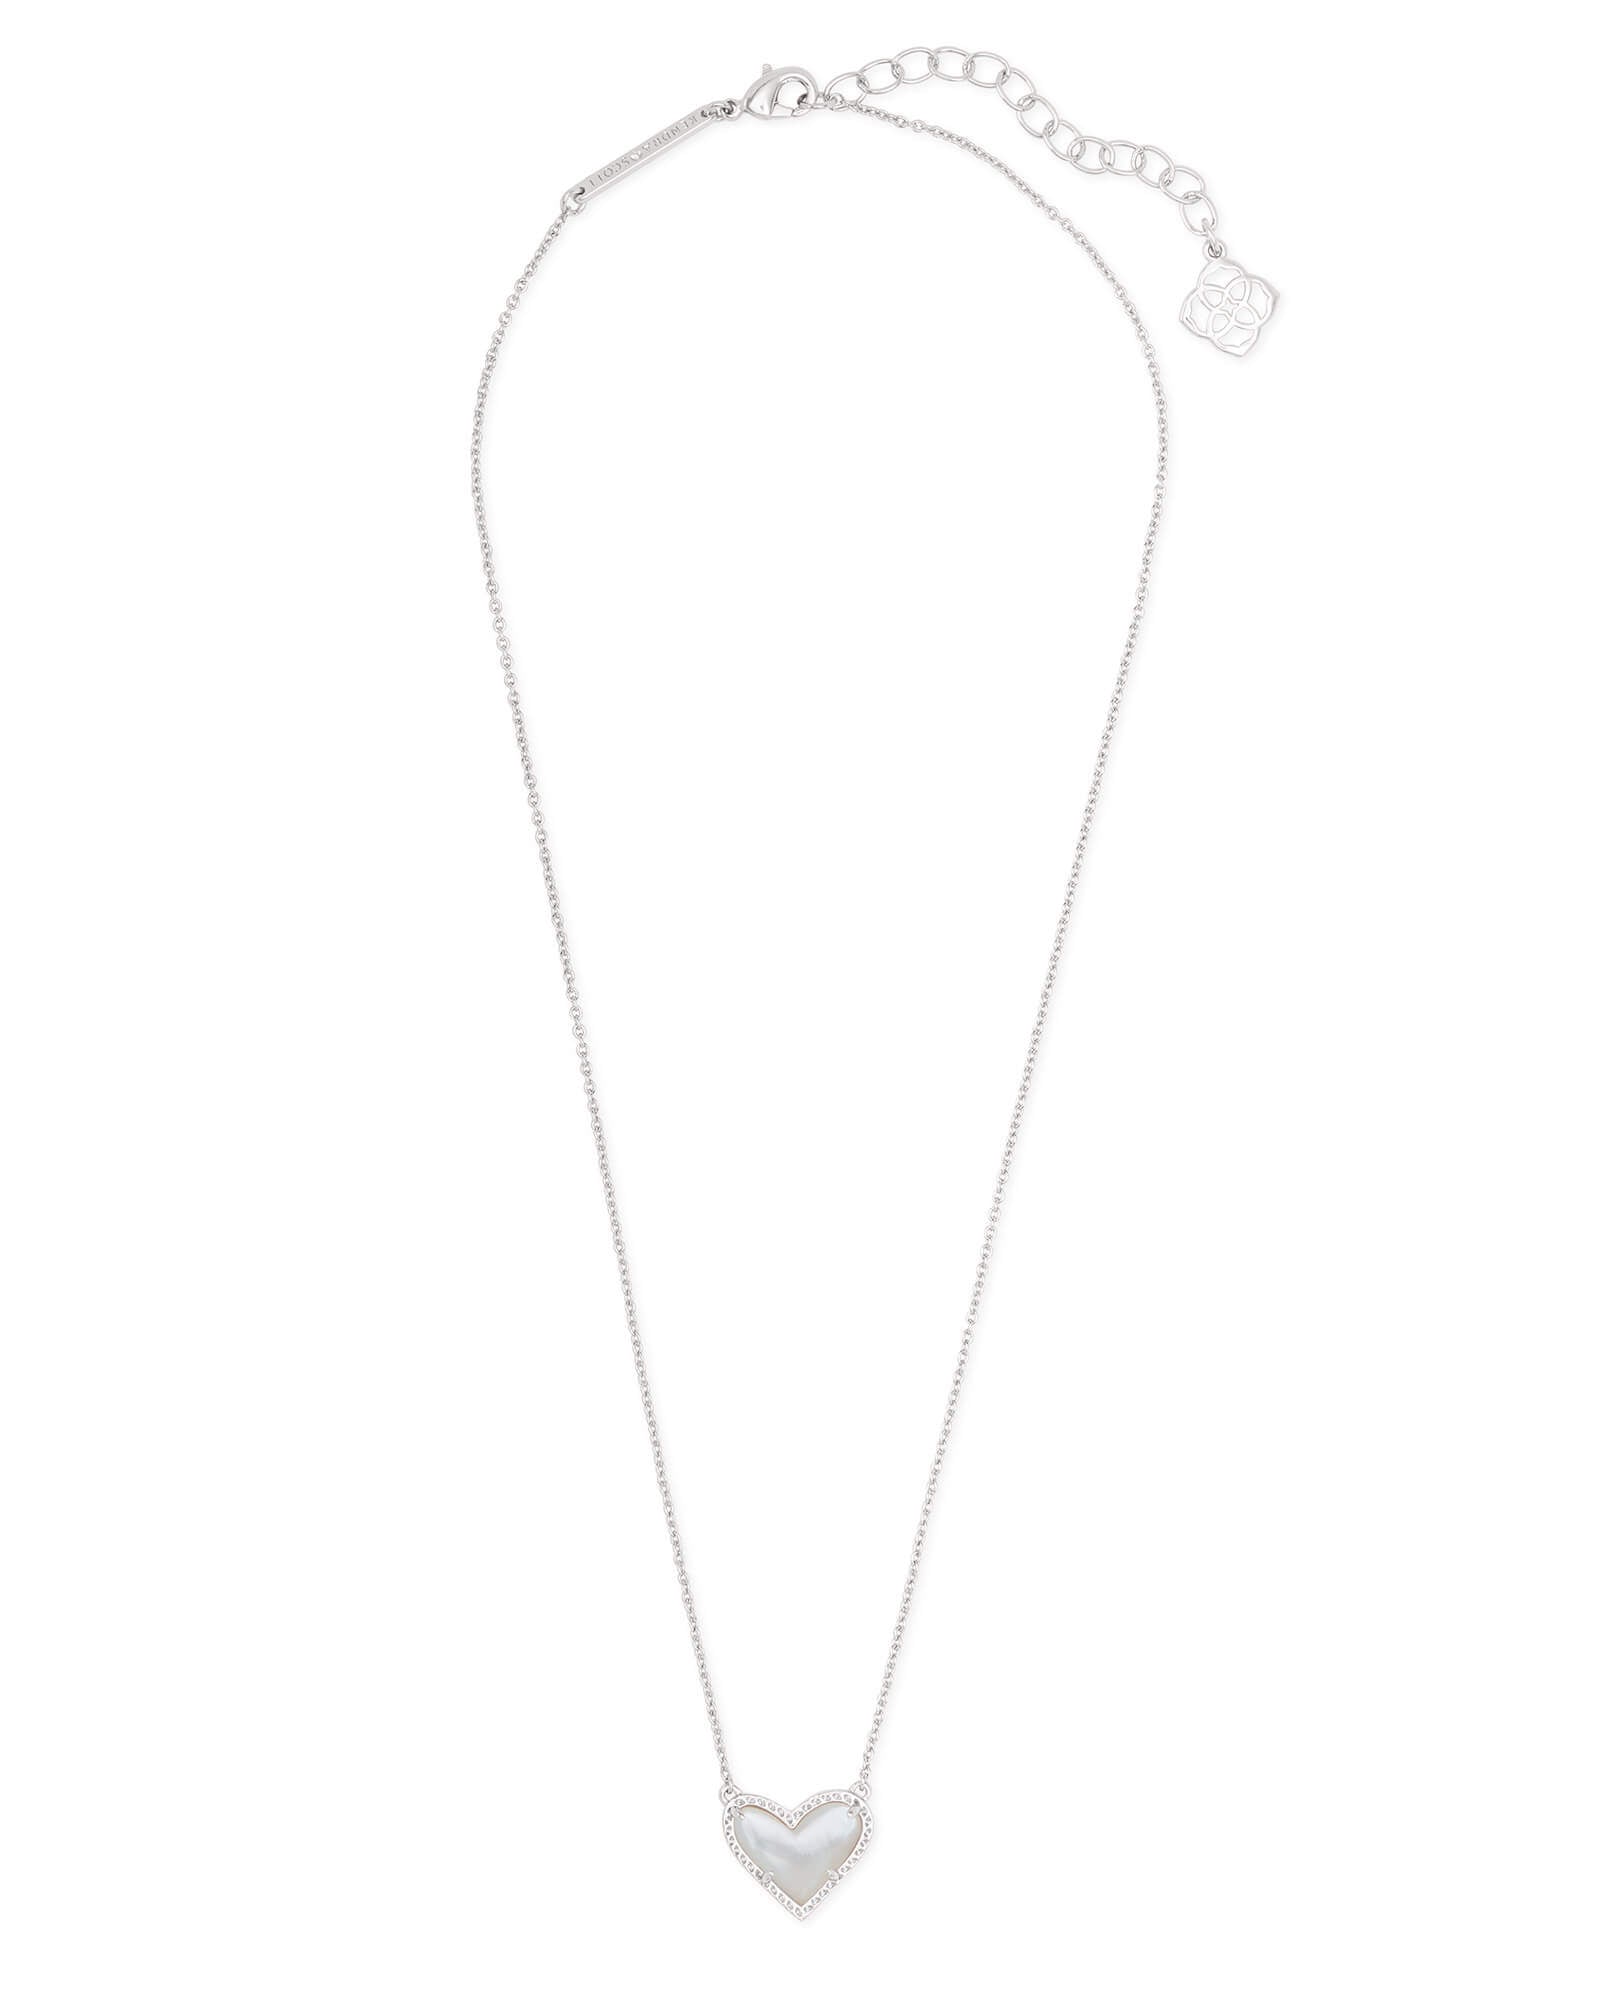 Kendra Scott Ari Heart Pendant Necklace in Ivory and Rhodium Plated